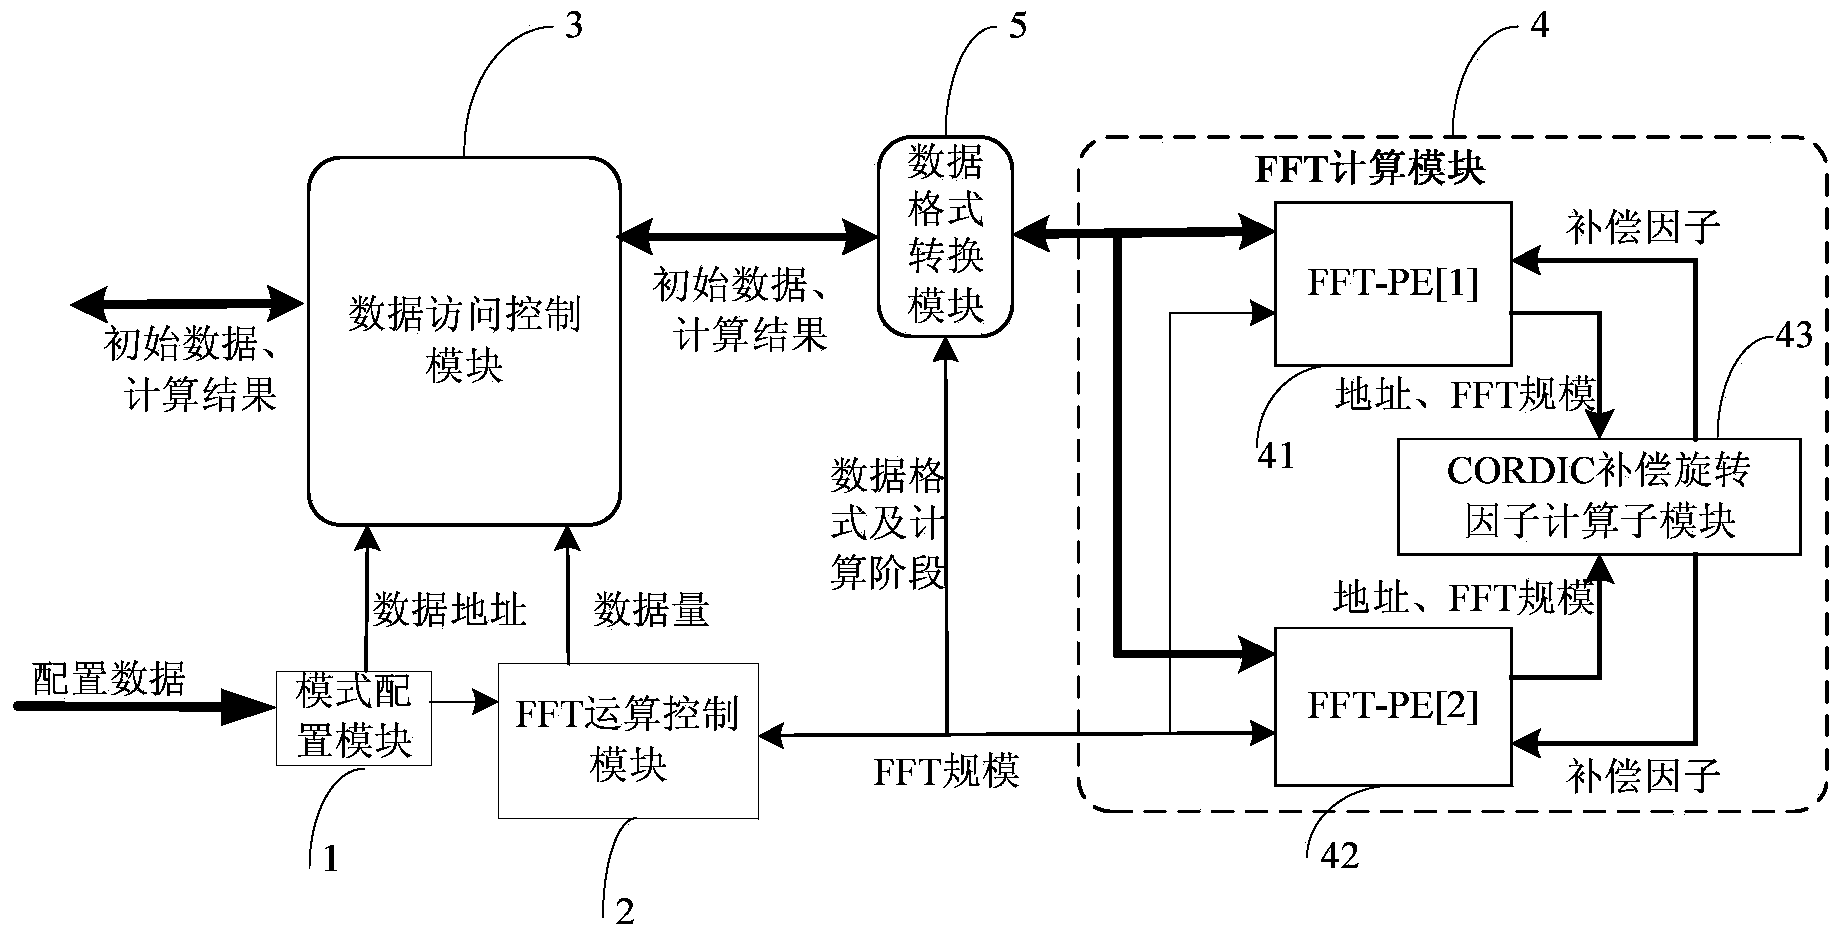 FFT accelerator based on DSP chip